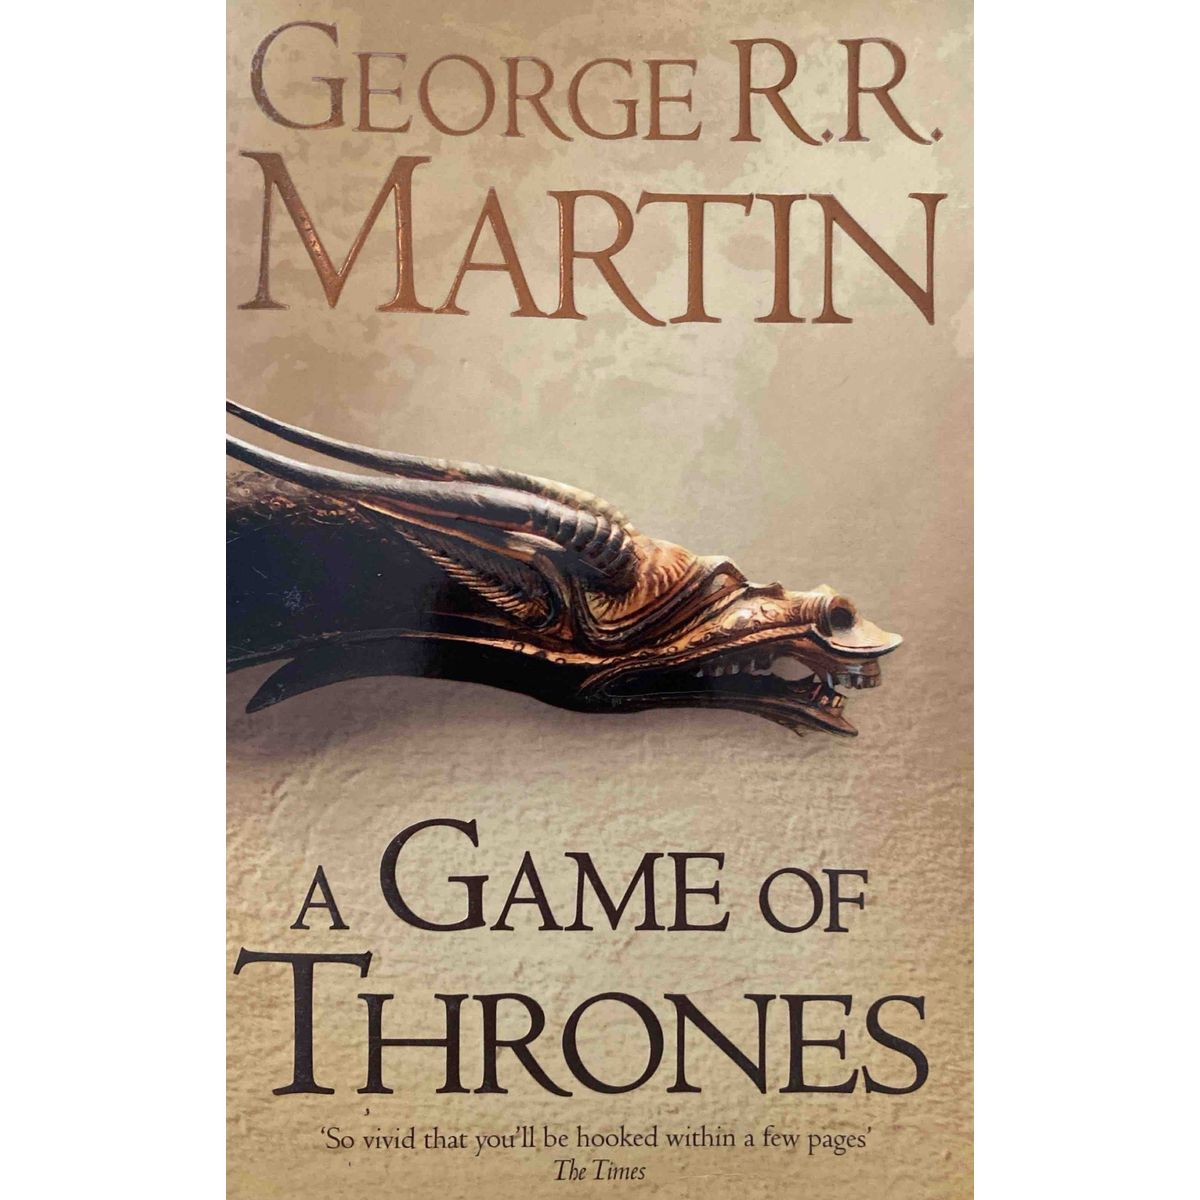 ISBN: 9780007448036 / 0007448031 - A Game of Thrones by George R.R. Martin [2011]